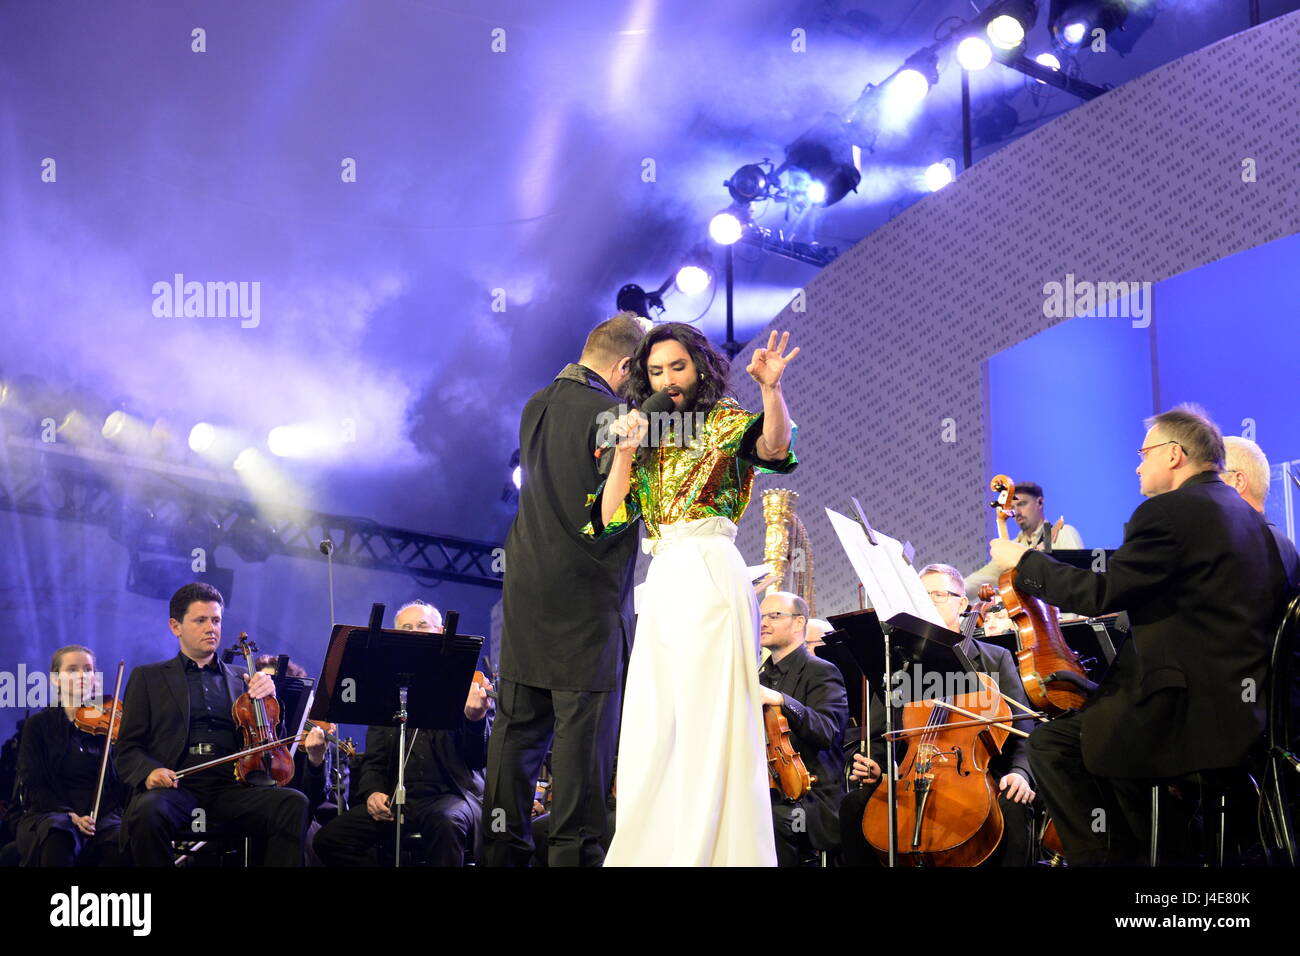 Vienna, Austria. May 12, 2017. Opening of the “Wiener Festwochen” 2017 at the Wiener Rathausplatz Vienna City Hall Square. Picture shows Conchita Wurst and the Vienna Symphony Orchestra. Credit: Franz Perc / Alamy Live News Stock Photo